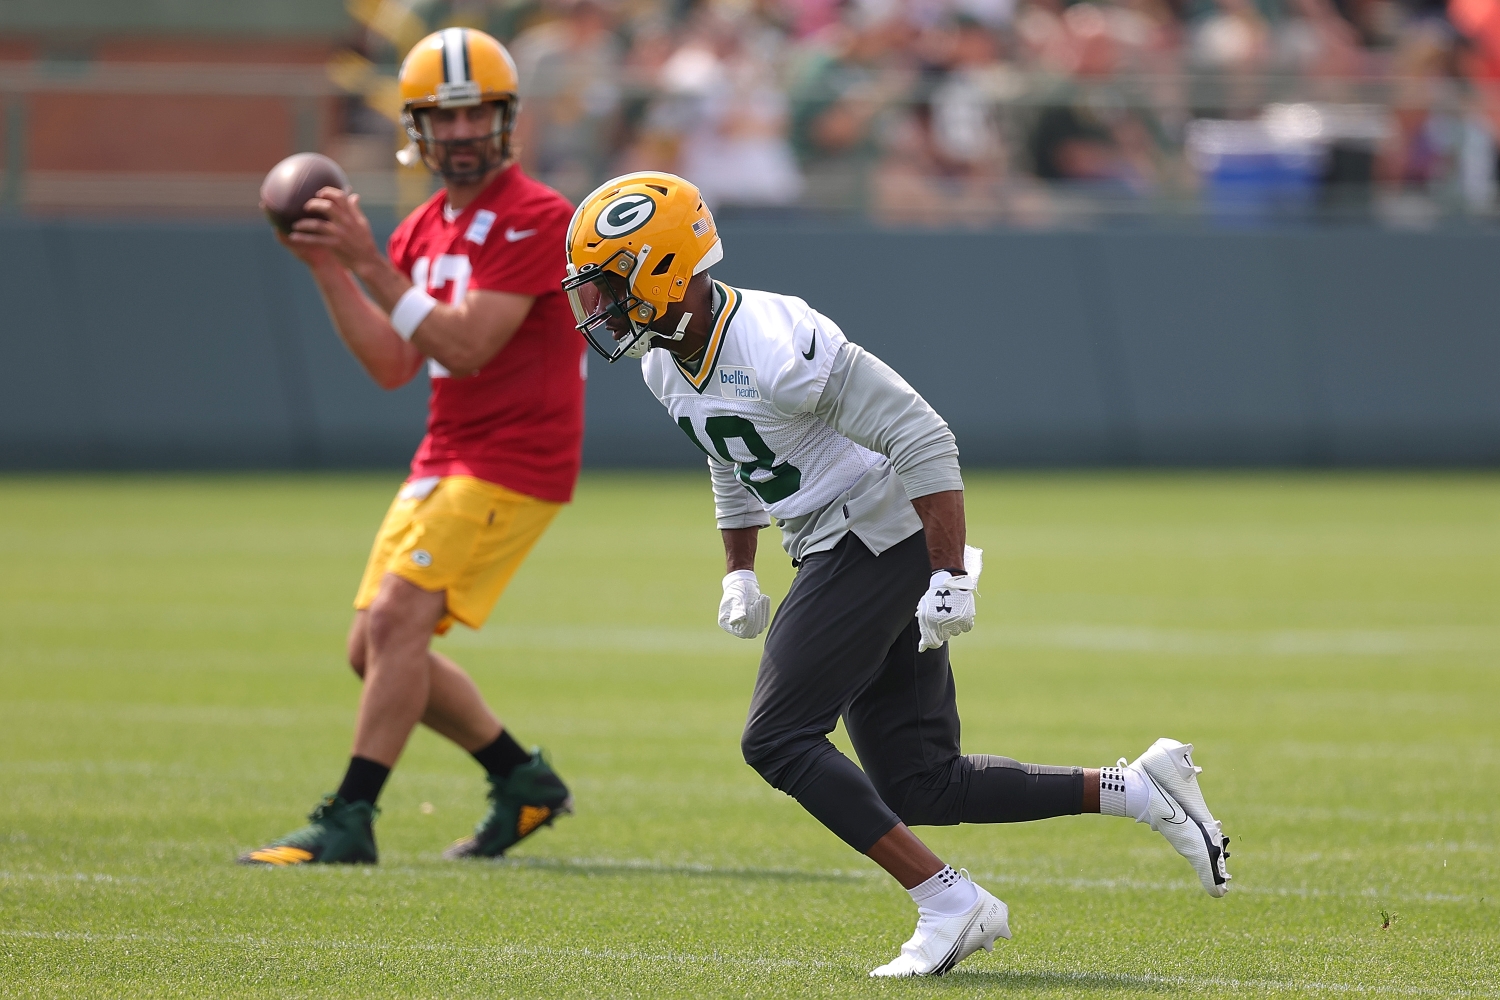 Green Bay Packers wide receiver Randall Cobb runs a route as Aaron Rodgers prepares to throw a pass.